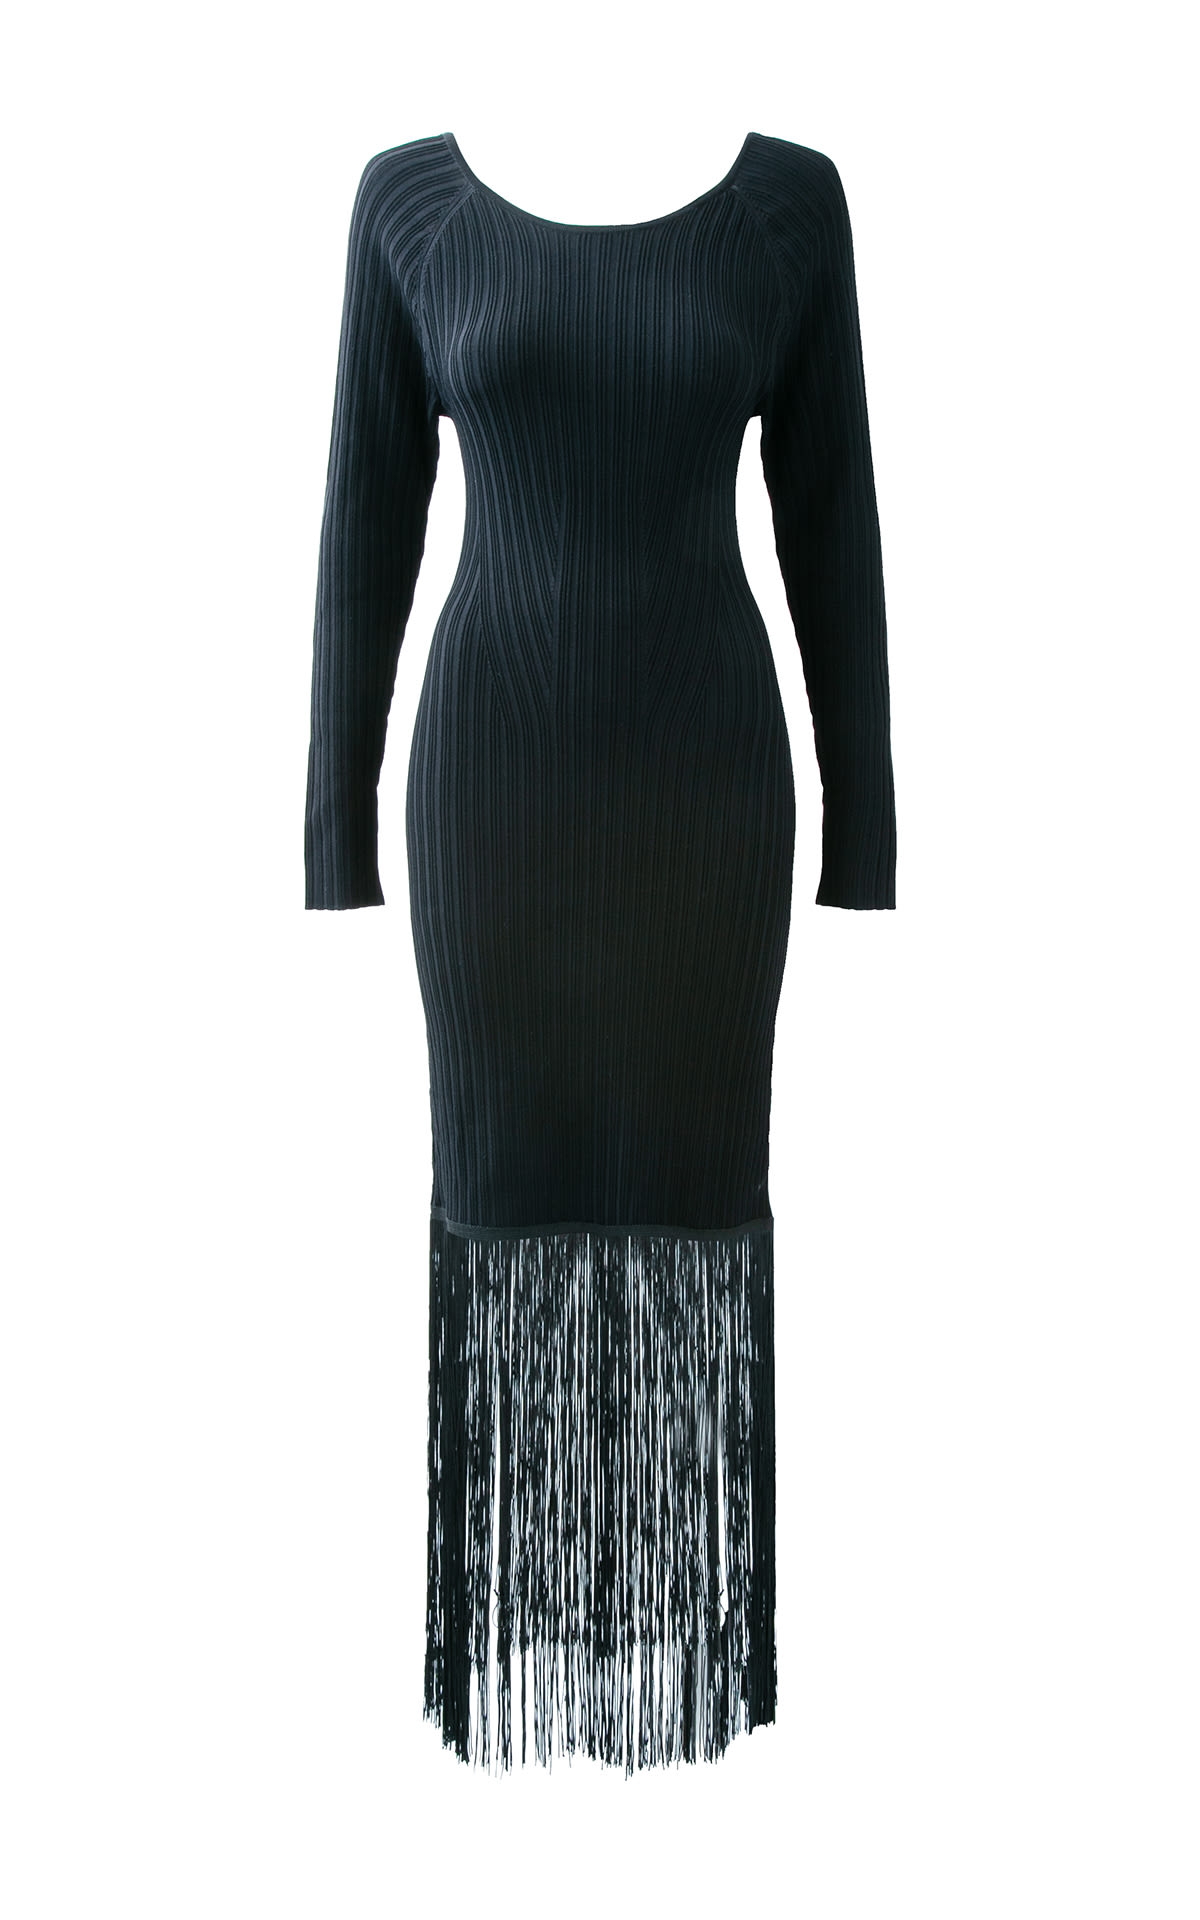 DKNY Maxi fringe dress from Bicester Village